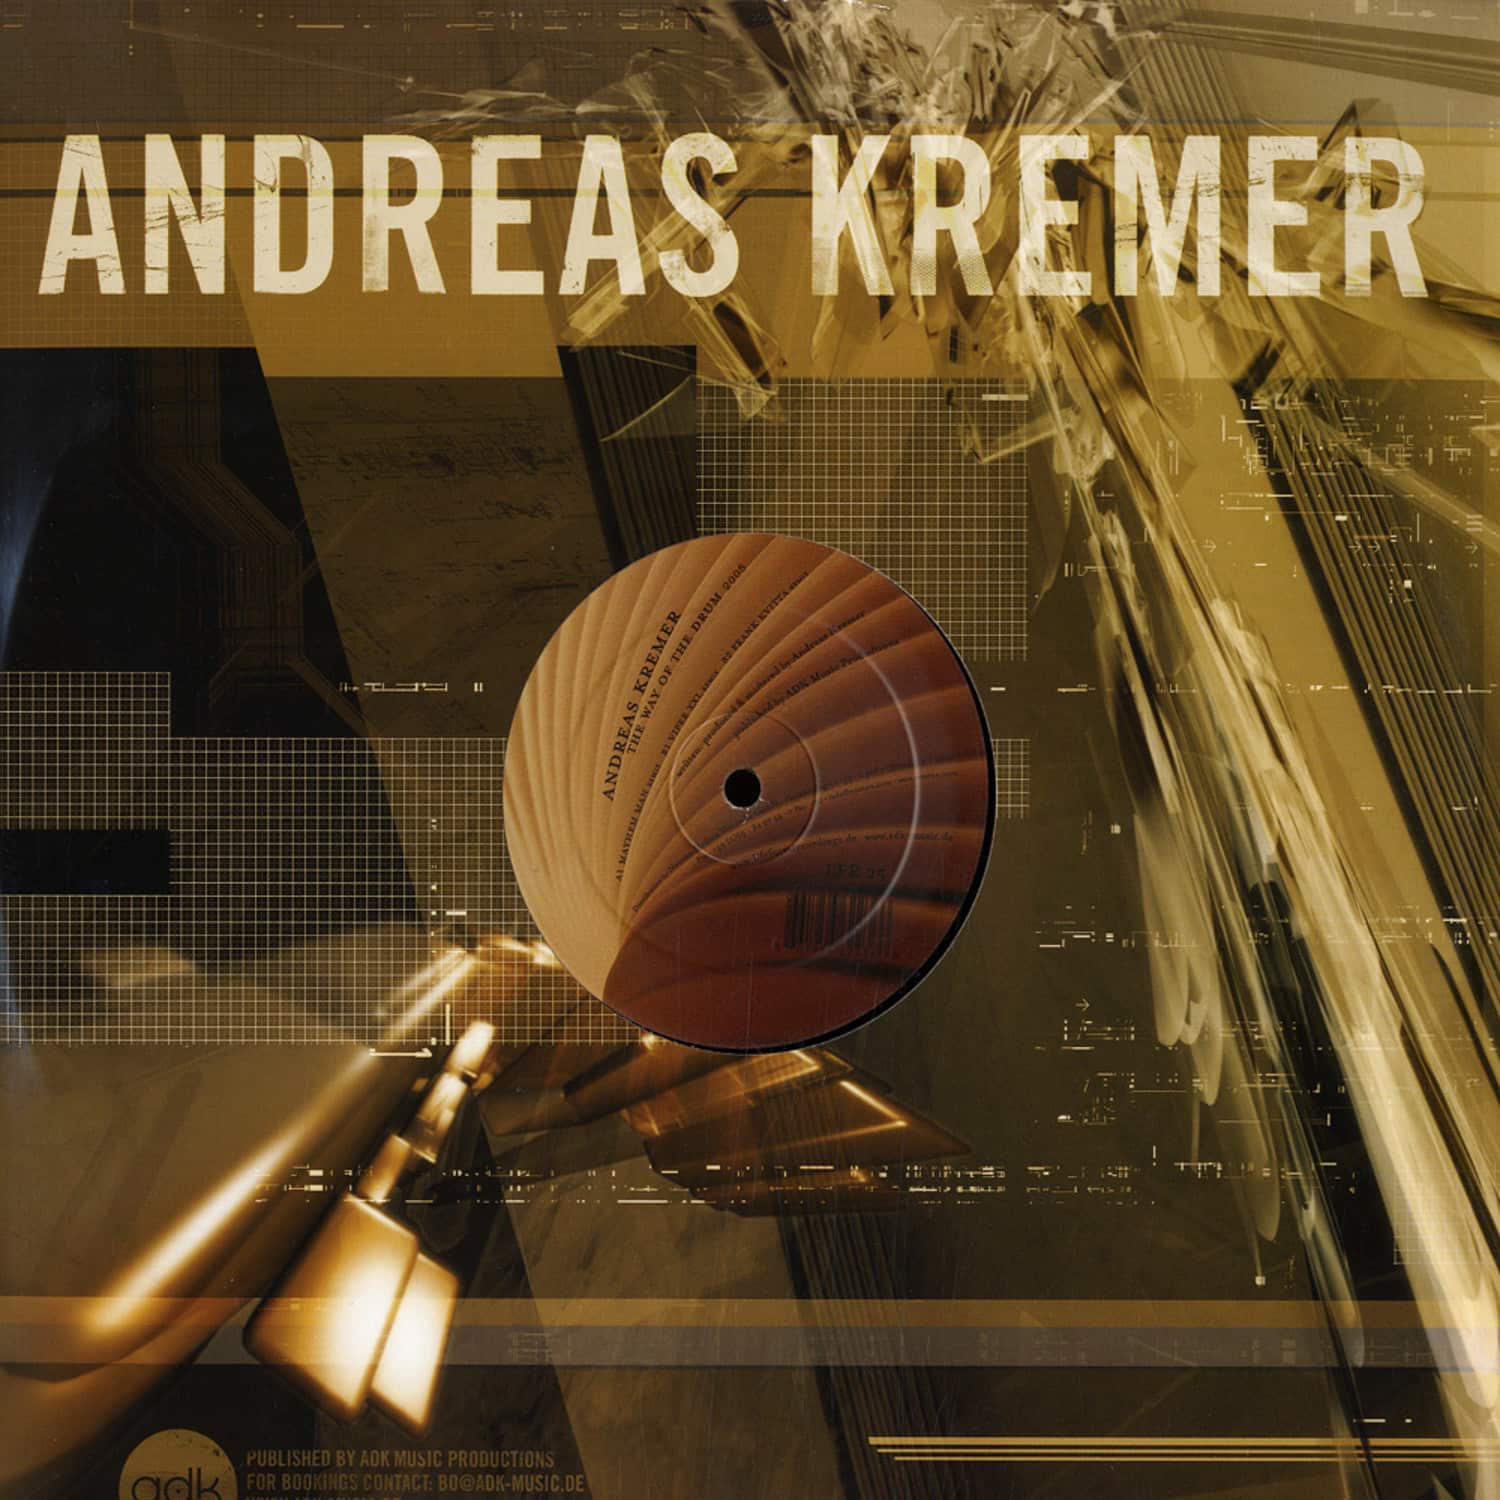 Andreas Kremer - THE WAY OF THE DRUM 2005